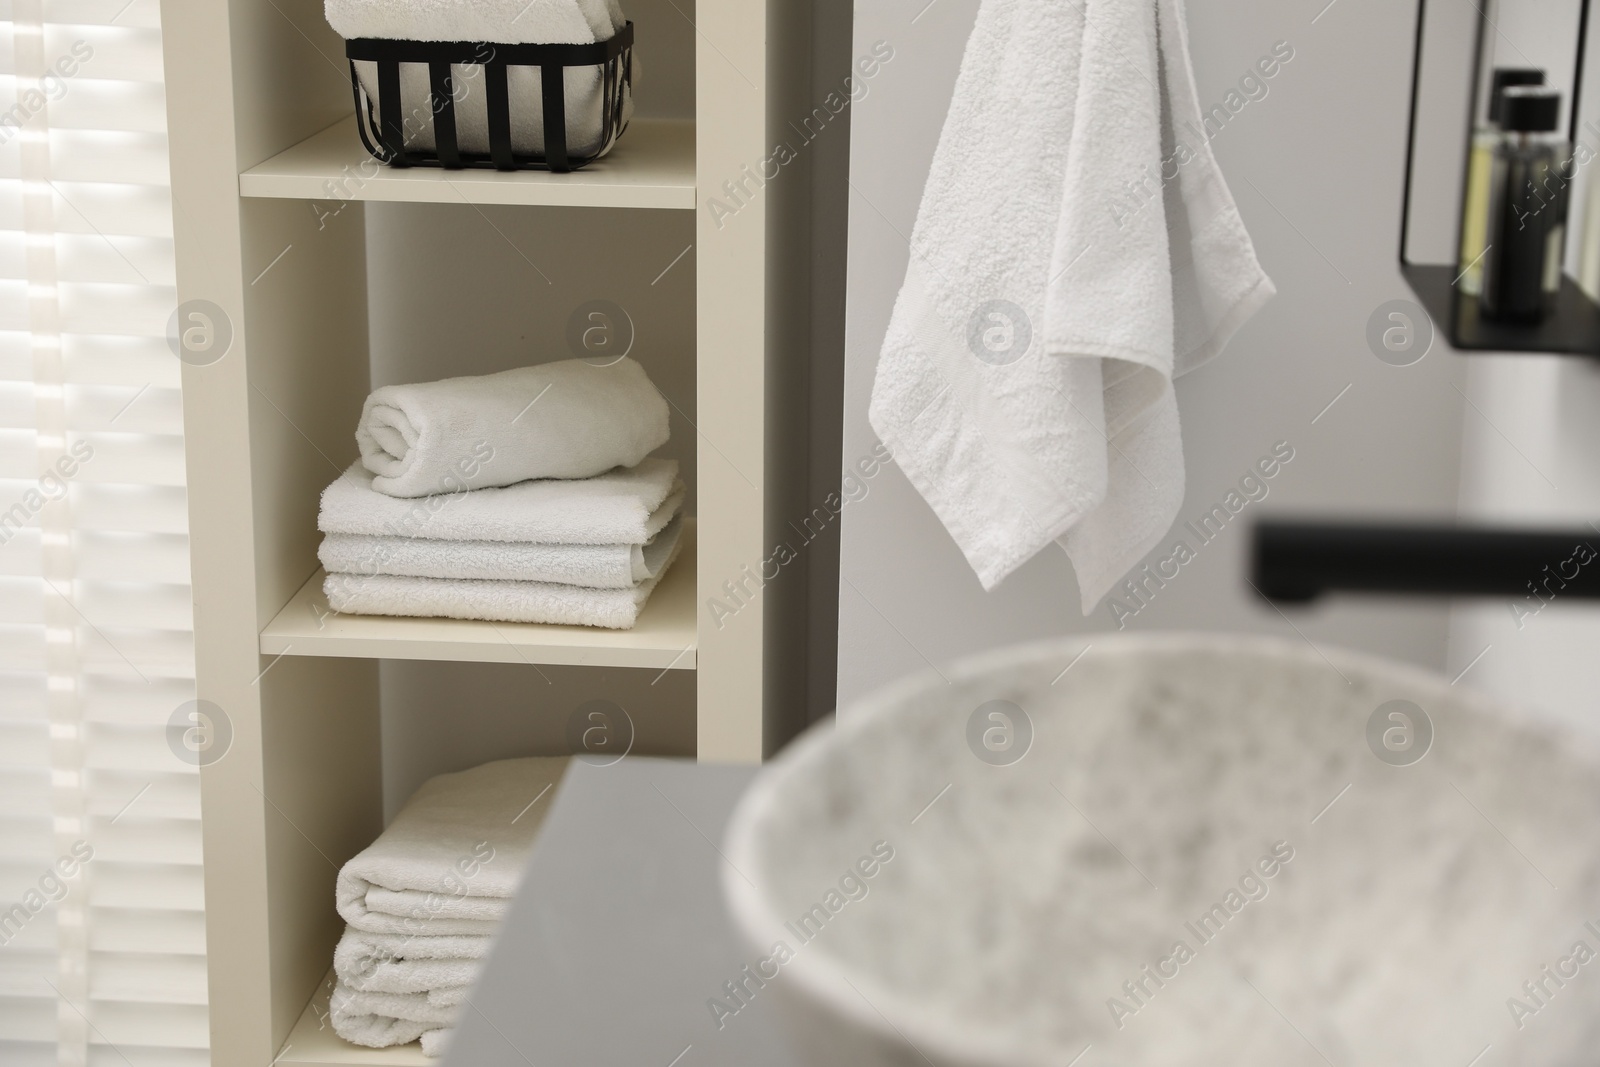 Photo of Shelving unit with stacked clean towels in bathroom